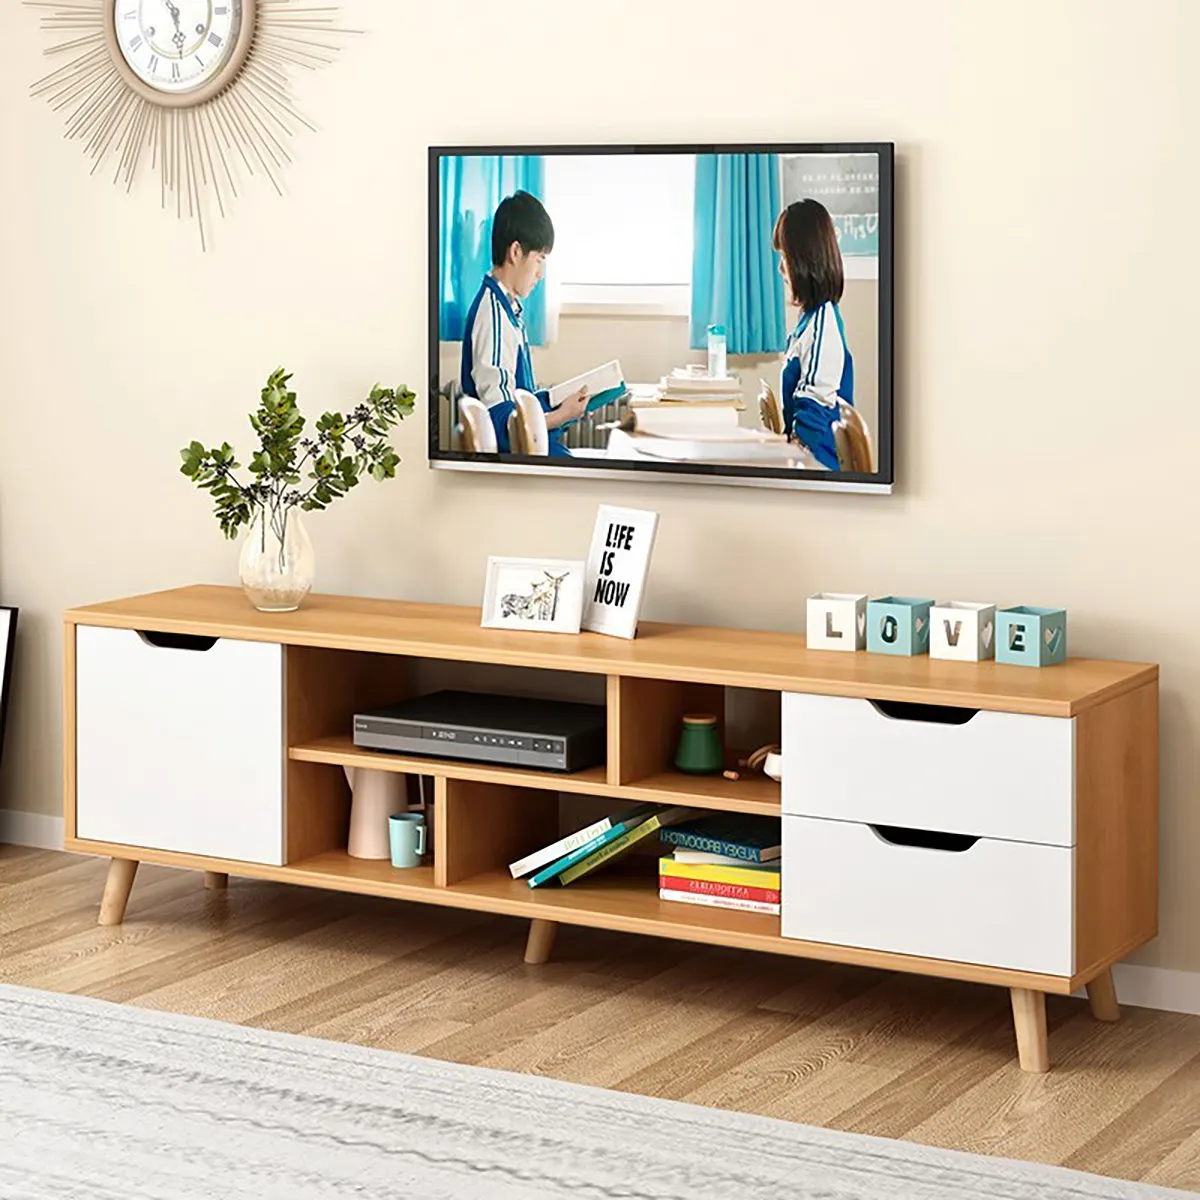 140cm Modern TV Cabinet With Drawers TV Stand Storage Living Room